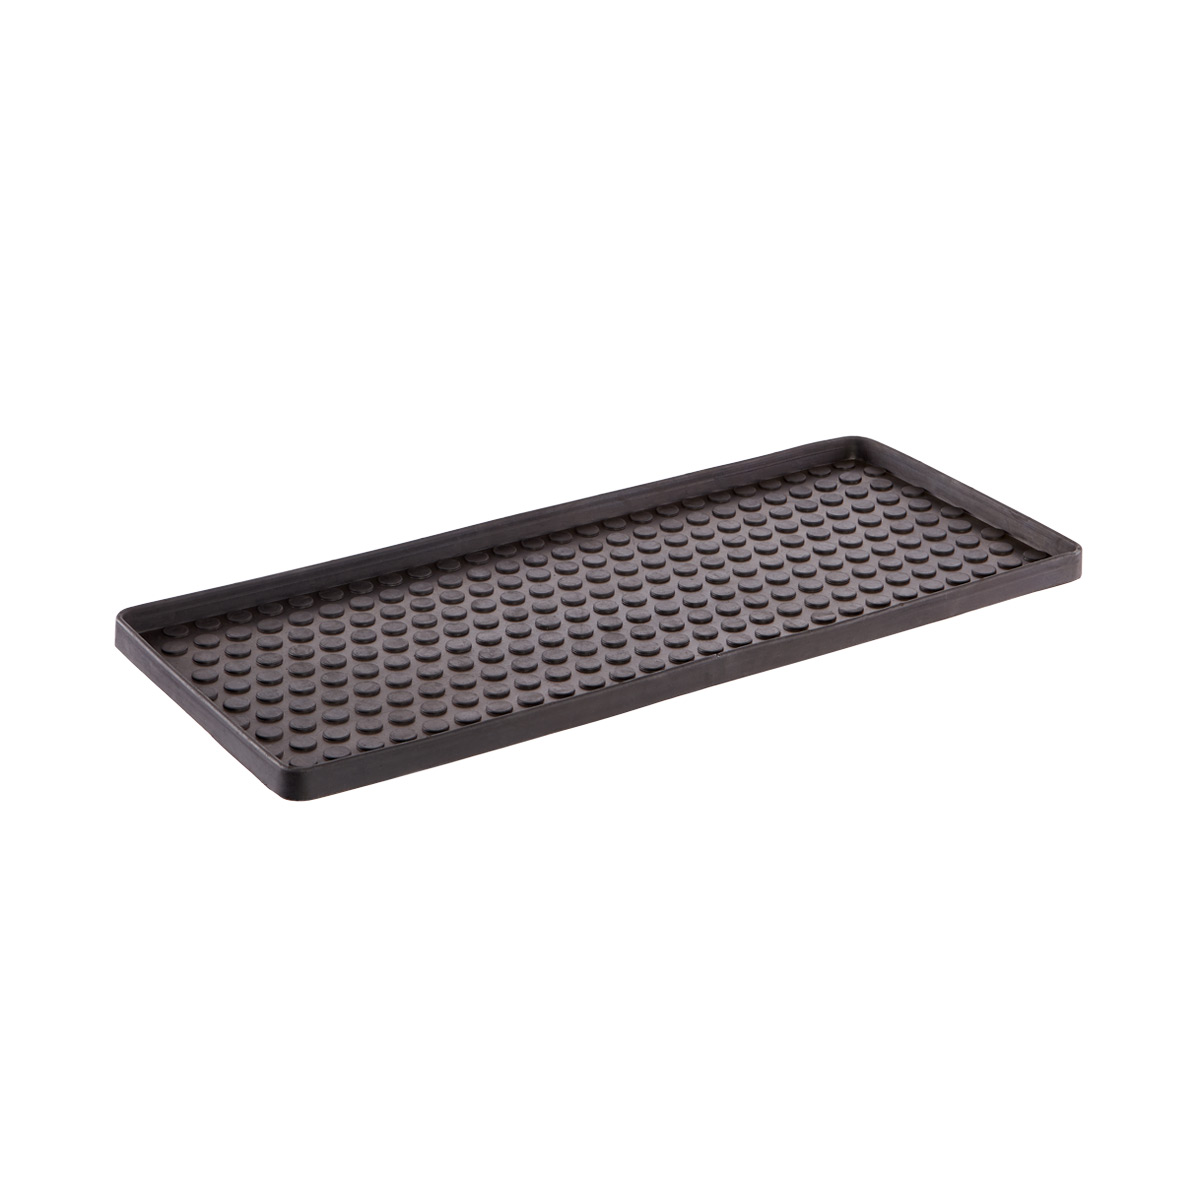 https://www.containerstore.com/catalogimages/323249/10072817-LARGE-SHOE-AND-BOOT-TRAY-DO.jpg